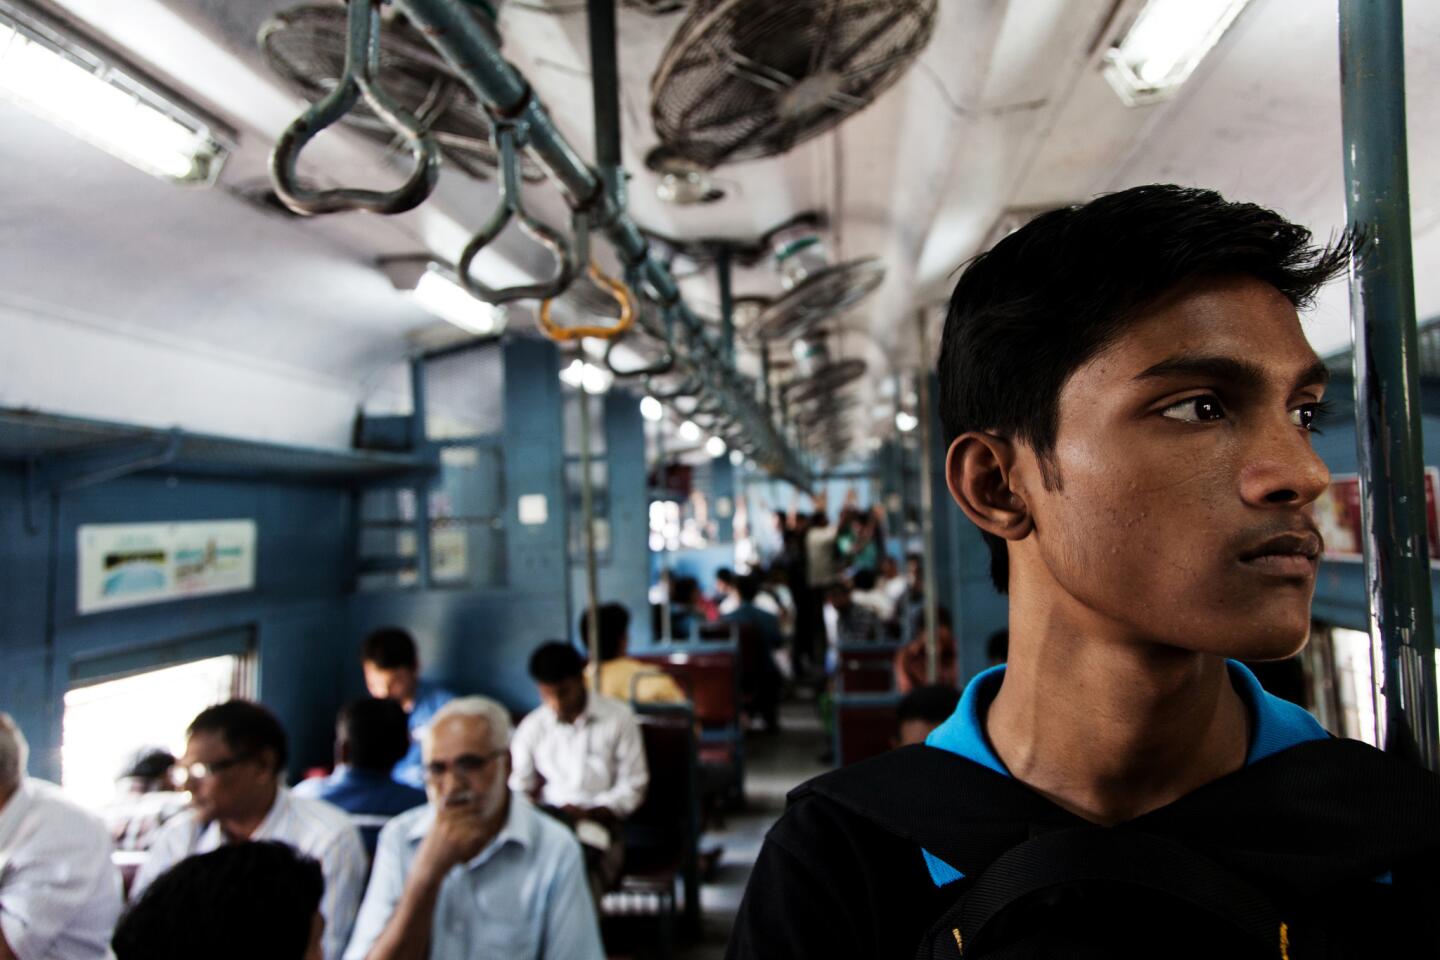 Aditya Giri, 19, of Mumbai takes a train to make a package delivery. He works for the startup Get My Peon, which takes care of mundane tasks for clients.